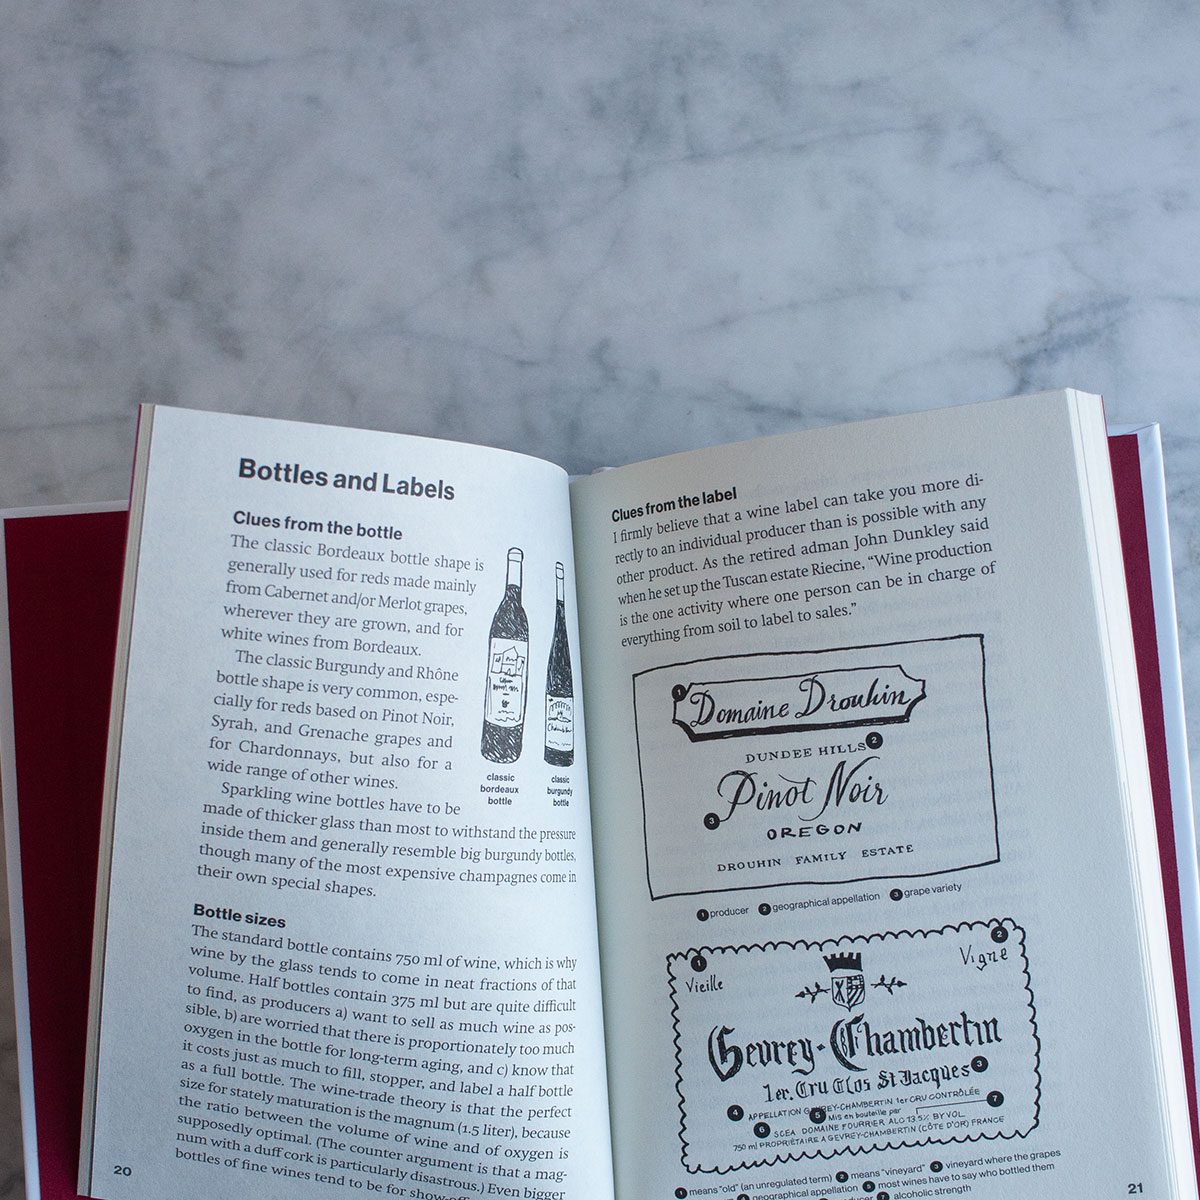 "24-Hr Wine Expert" open to pages 20/21 covering the topic of "Bottles and Labels" with headers titled: Clues from the bottle, Bottle sizes, Clues from the label. On the right page there are two sketches of bottle labels with label attributes numbered with a key indicating what each attribute means.